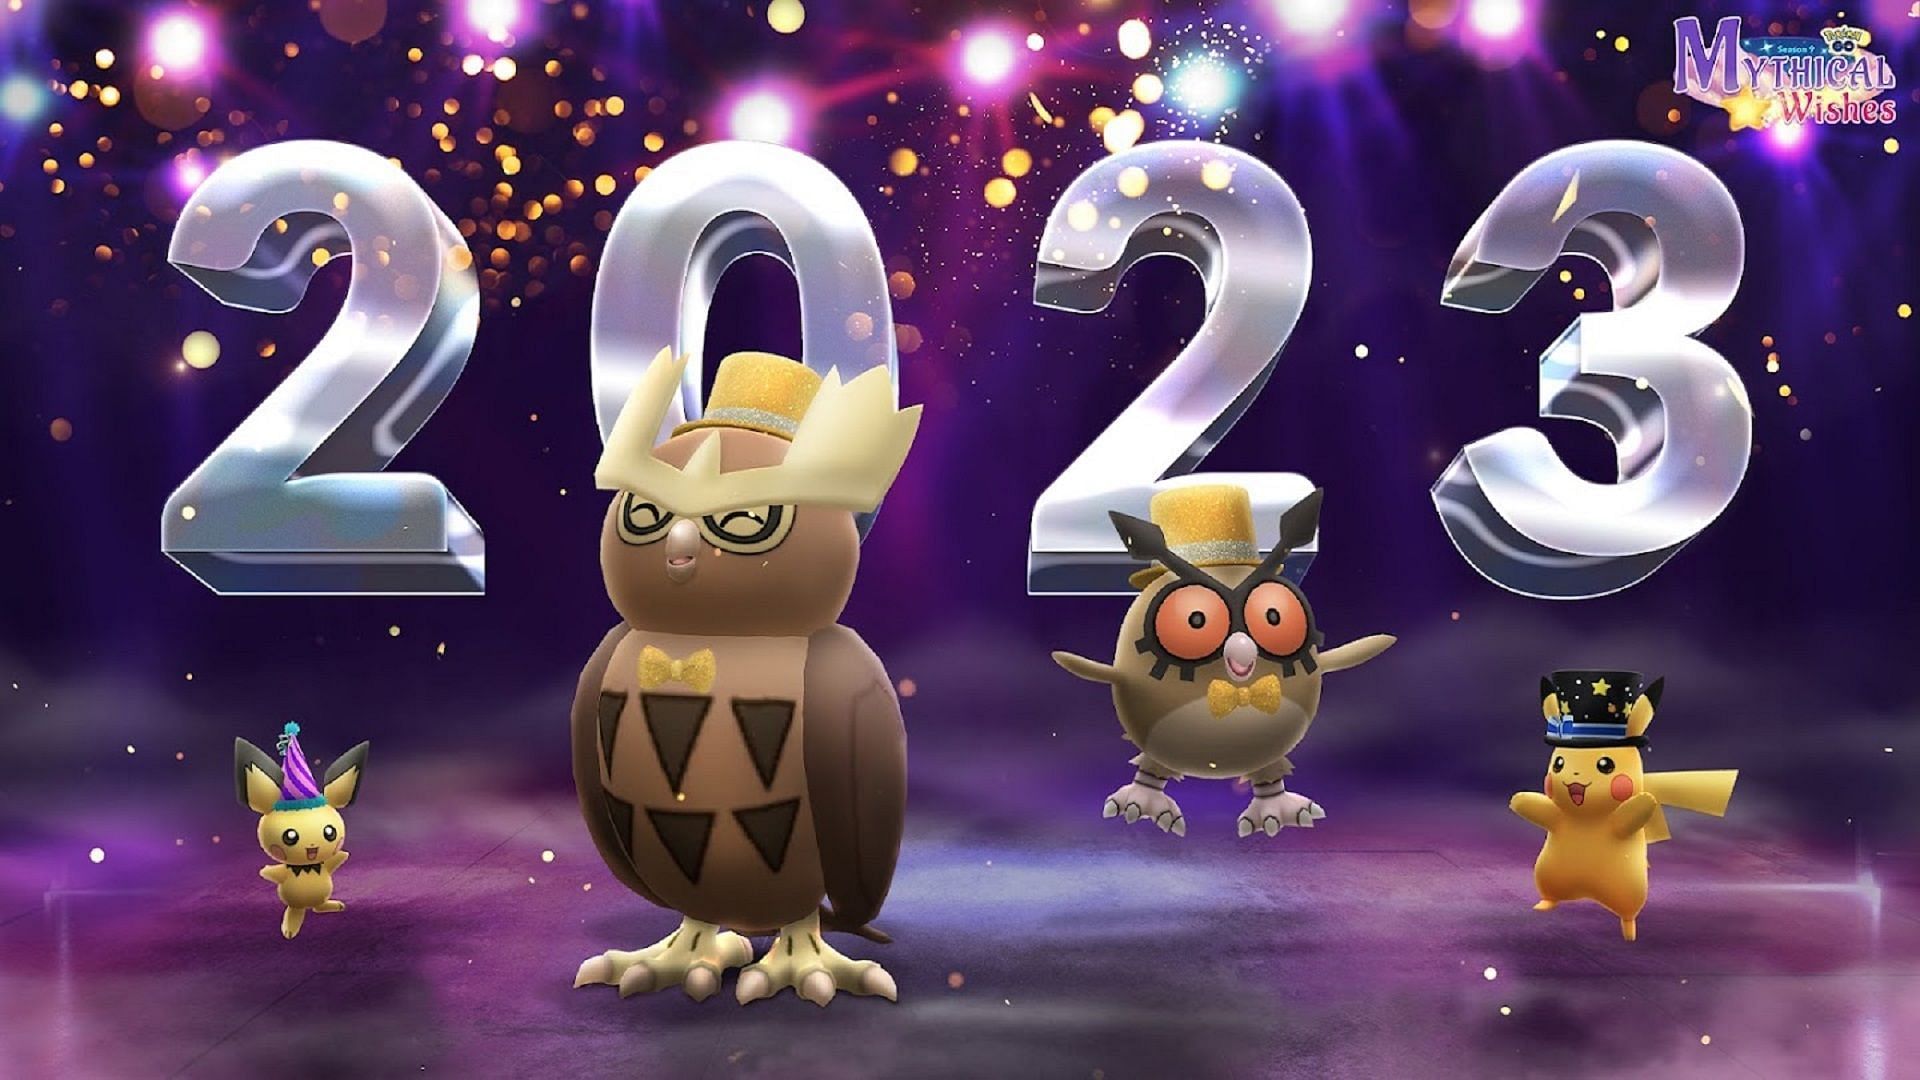 Pokemon GO is ushering in 2023, but many players haven